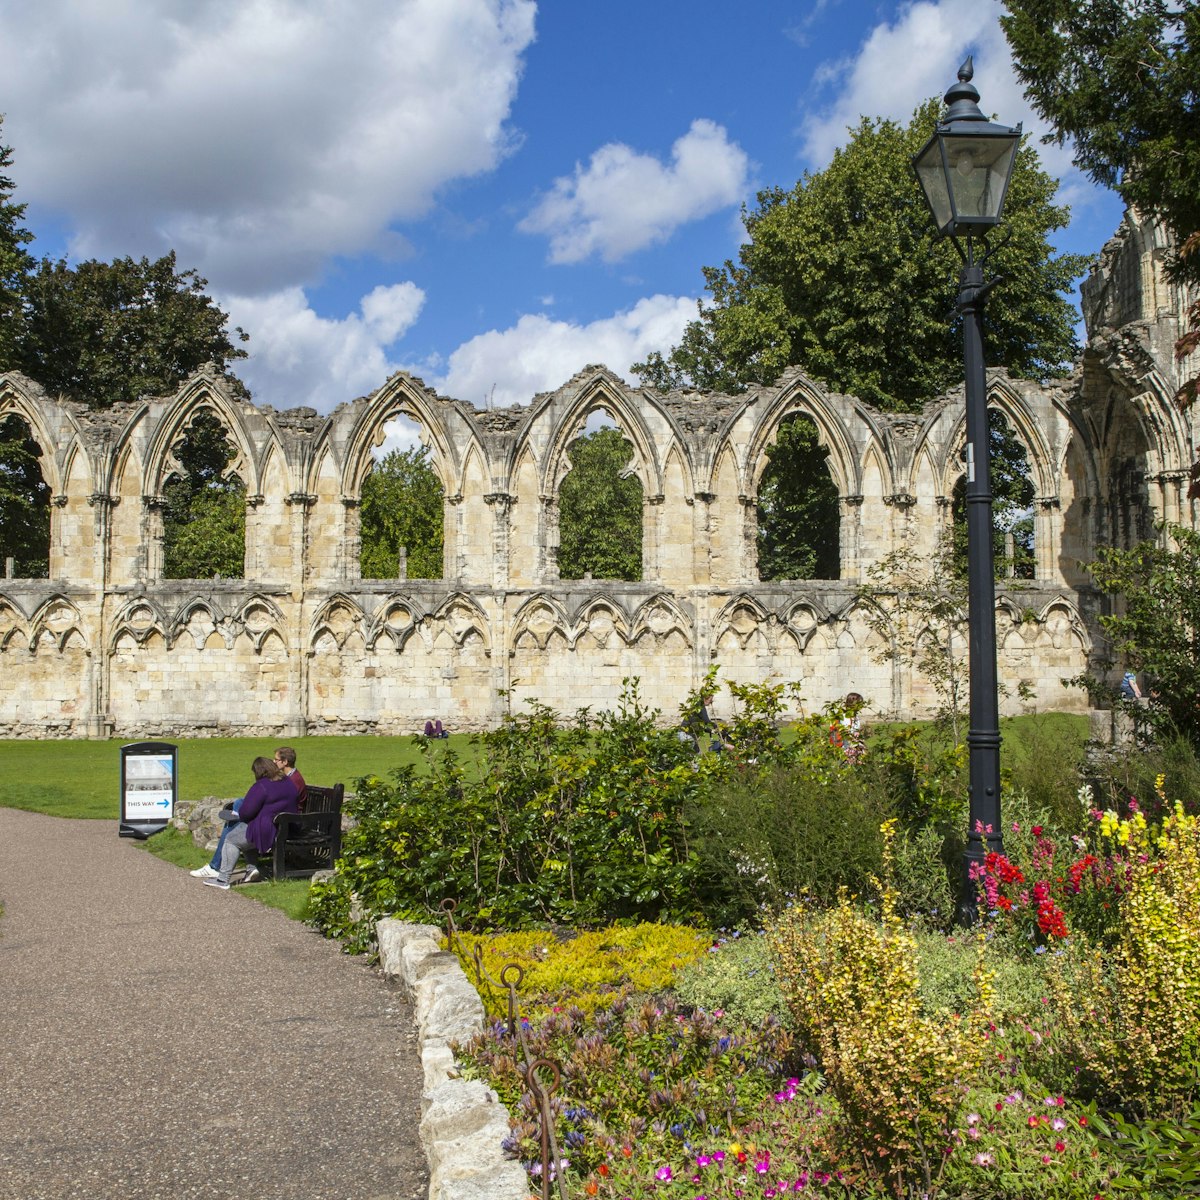 YORK, UK - AUGUST 27TH 2015: A view of St. Marys Abbey Ruins situated in Museum Gardens in York, on 27th August 2015.